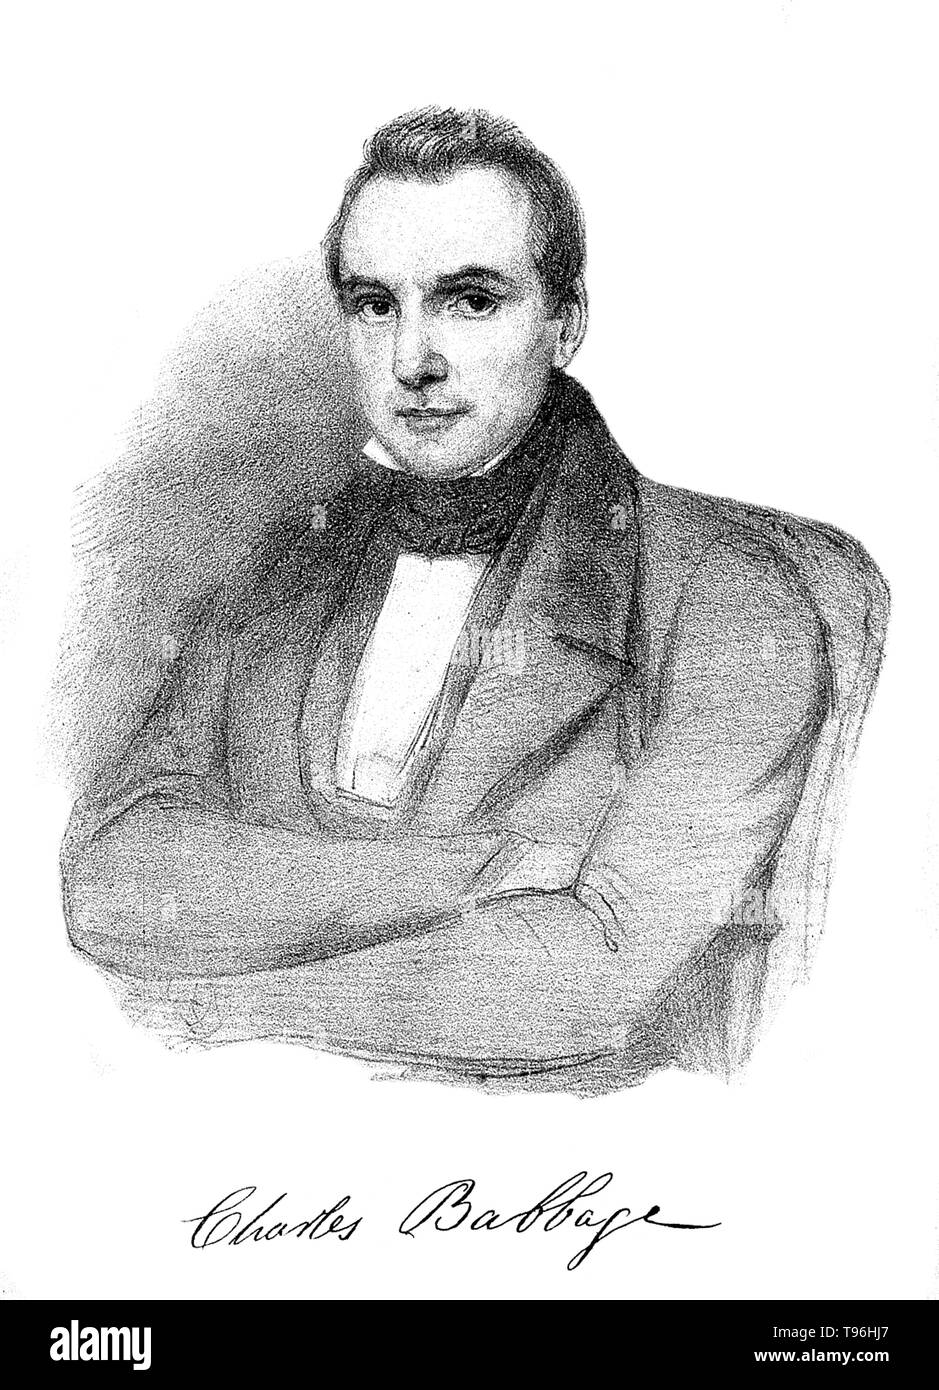 Charles Babbage (December 26, 1791 - October 18, 1871) was an English polymath. A mathematician, philosopher, inventor and mechanical engineer, he is best remembered for originating the concept of a digital programmable computer. Stock Photo